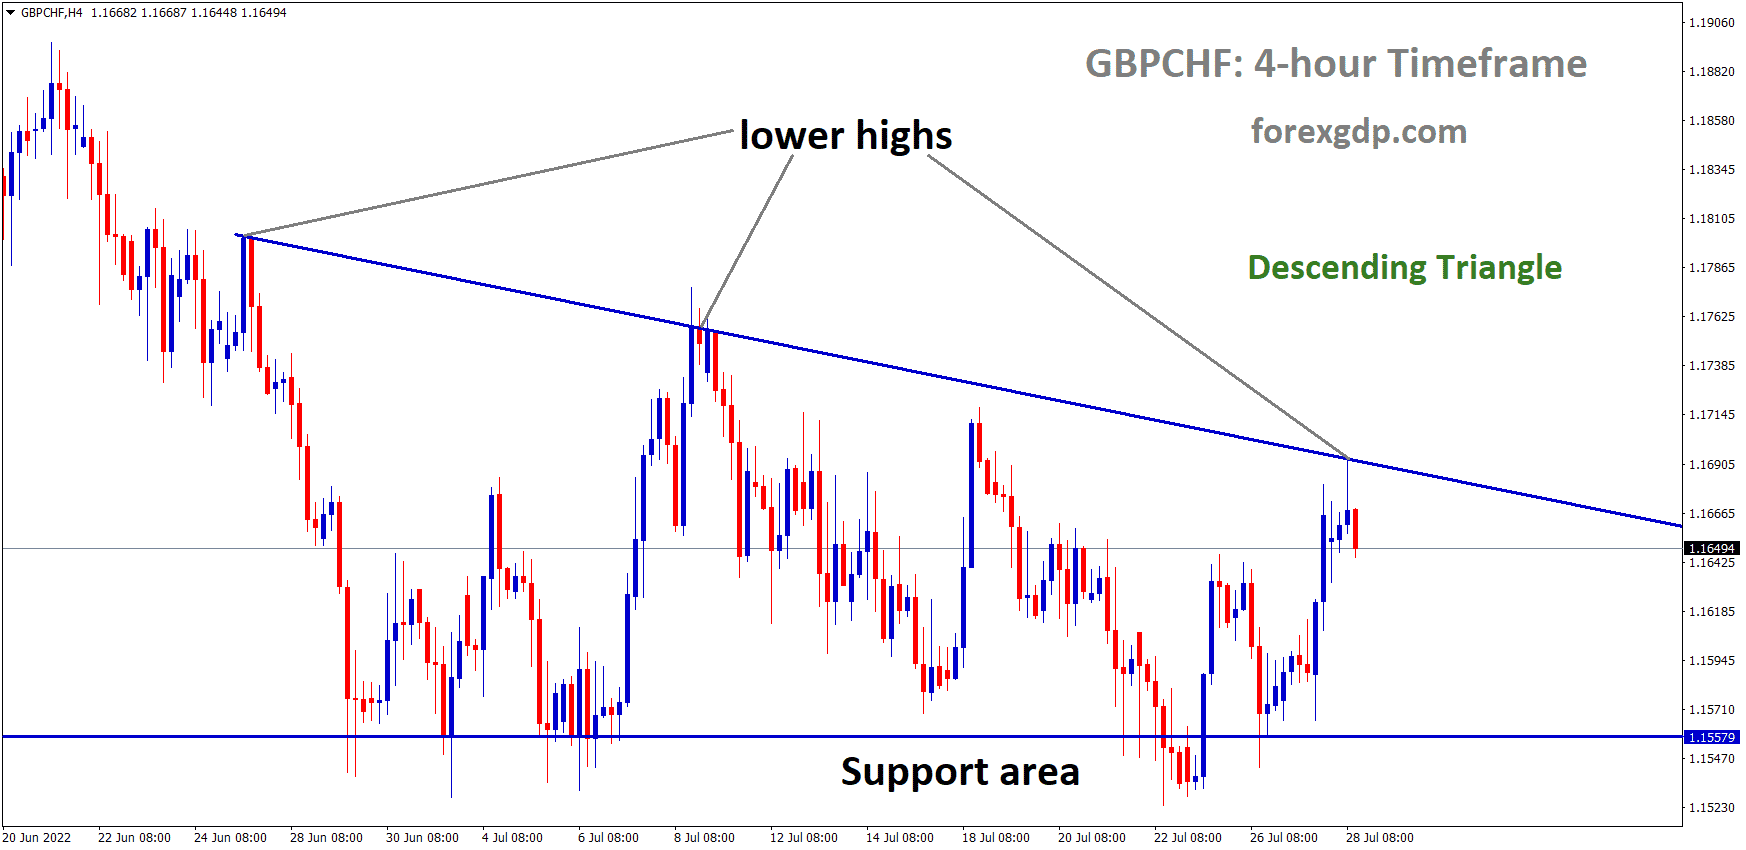 GBPCHF is moving in the Descending triangle pattern and the Market has Fallen from the Lower high area of the Pattern